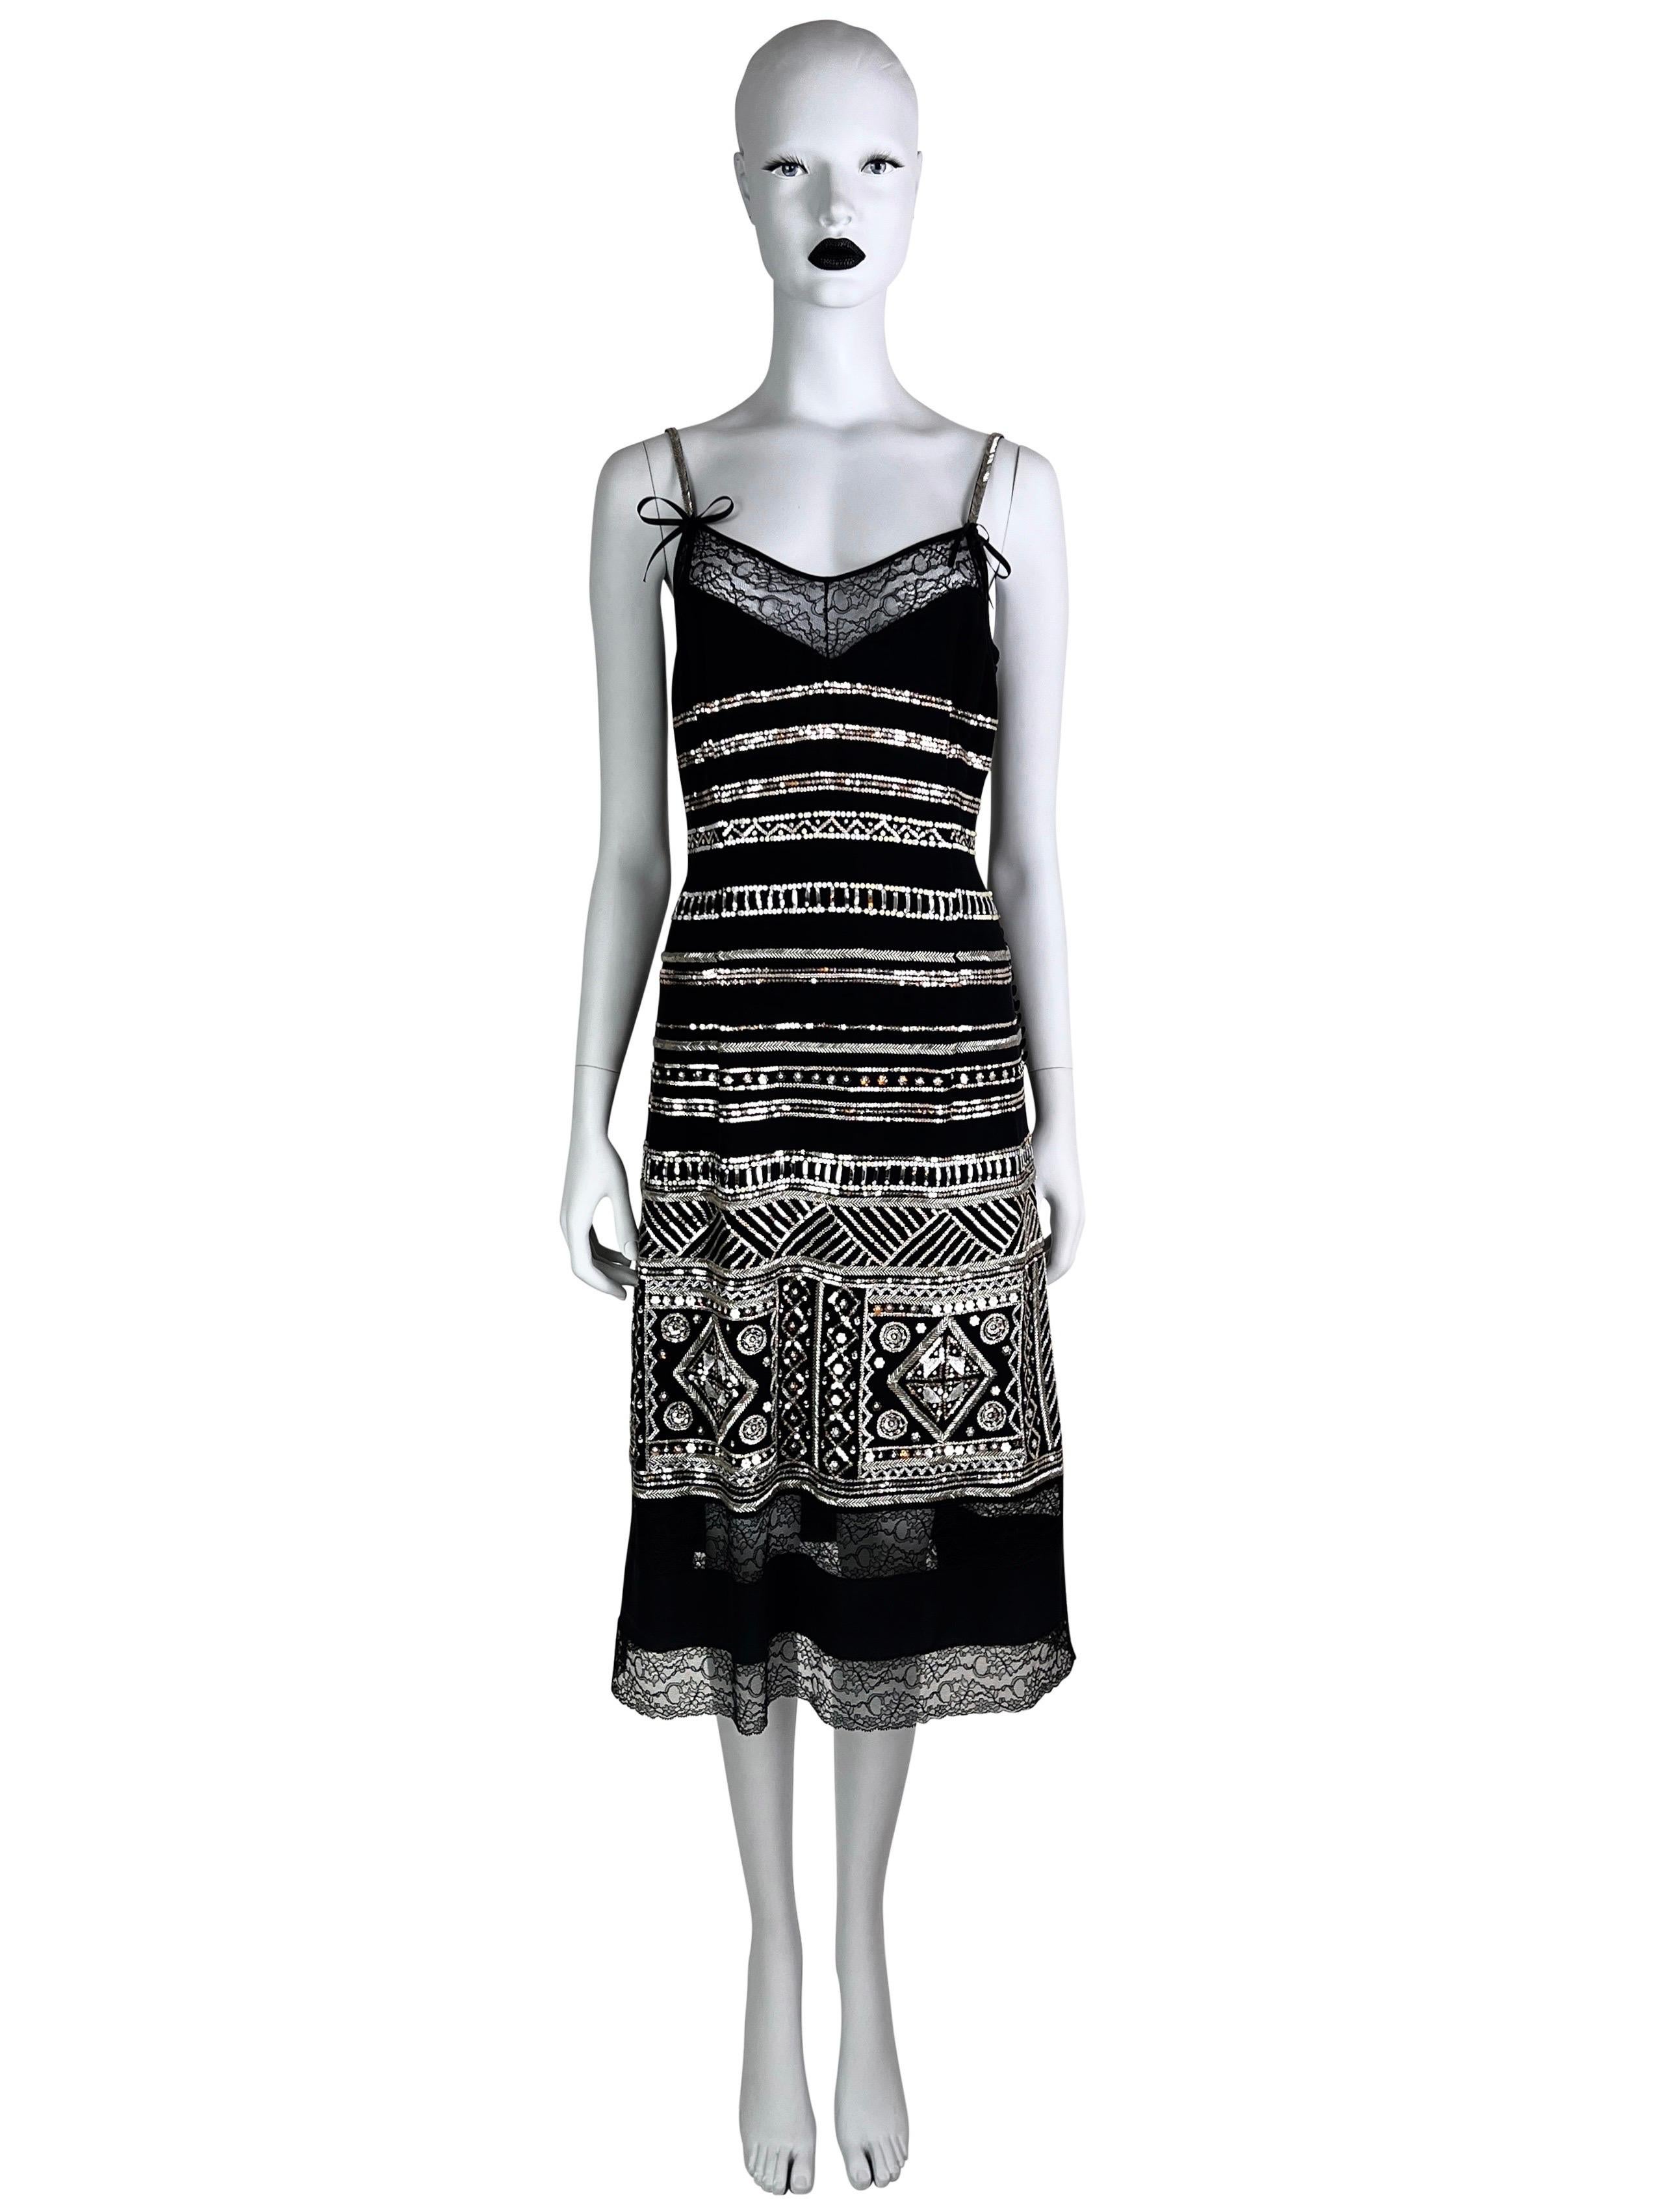 Dior by John Galliano Spring 2006 Embellished and Beaded Silk Cami Dress  For Sale 1